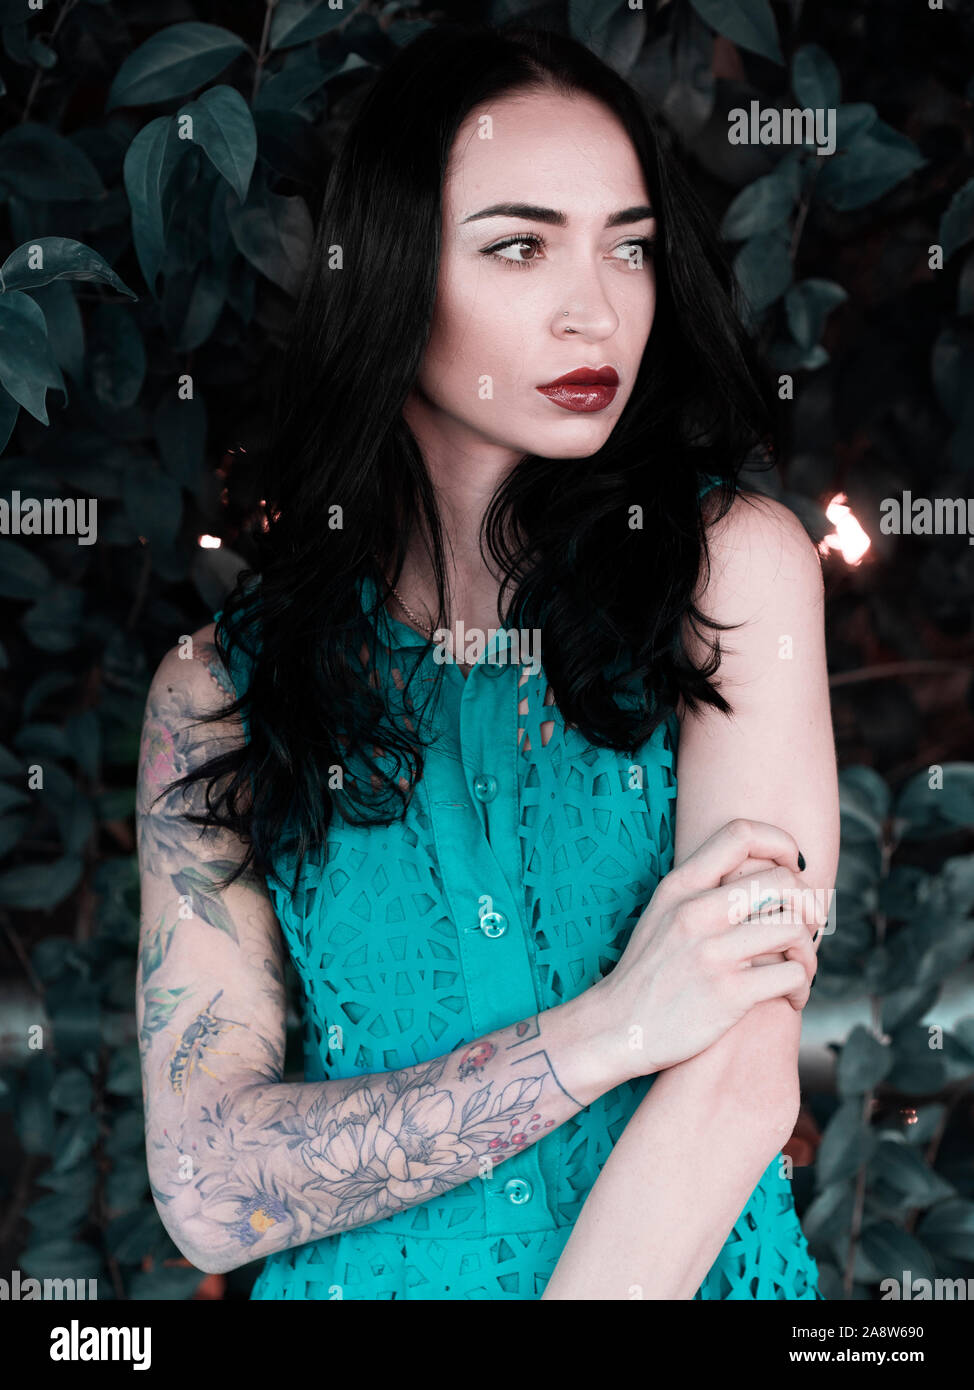 Beautiful young woman with tattooed arm Stock Photo